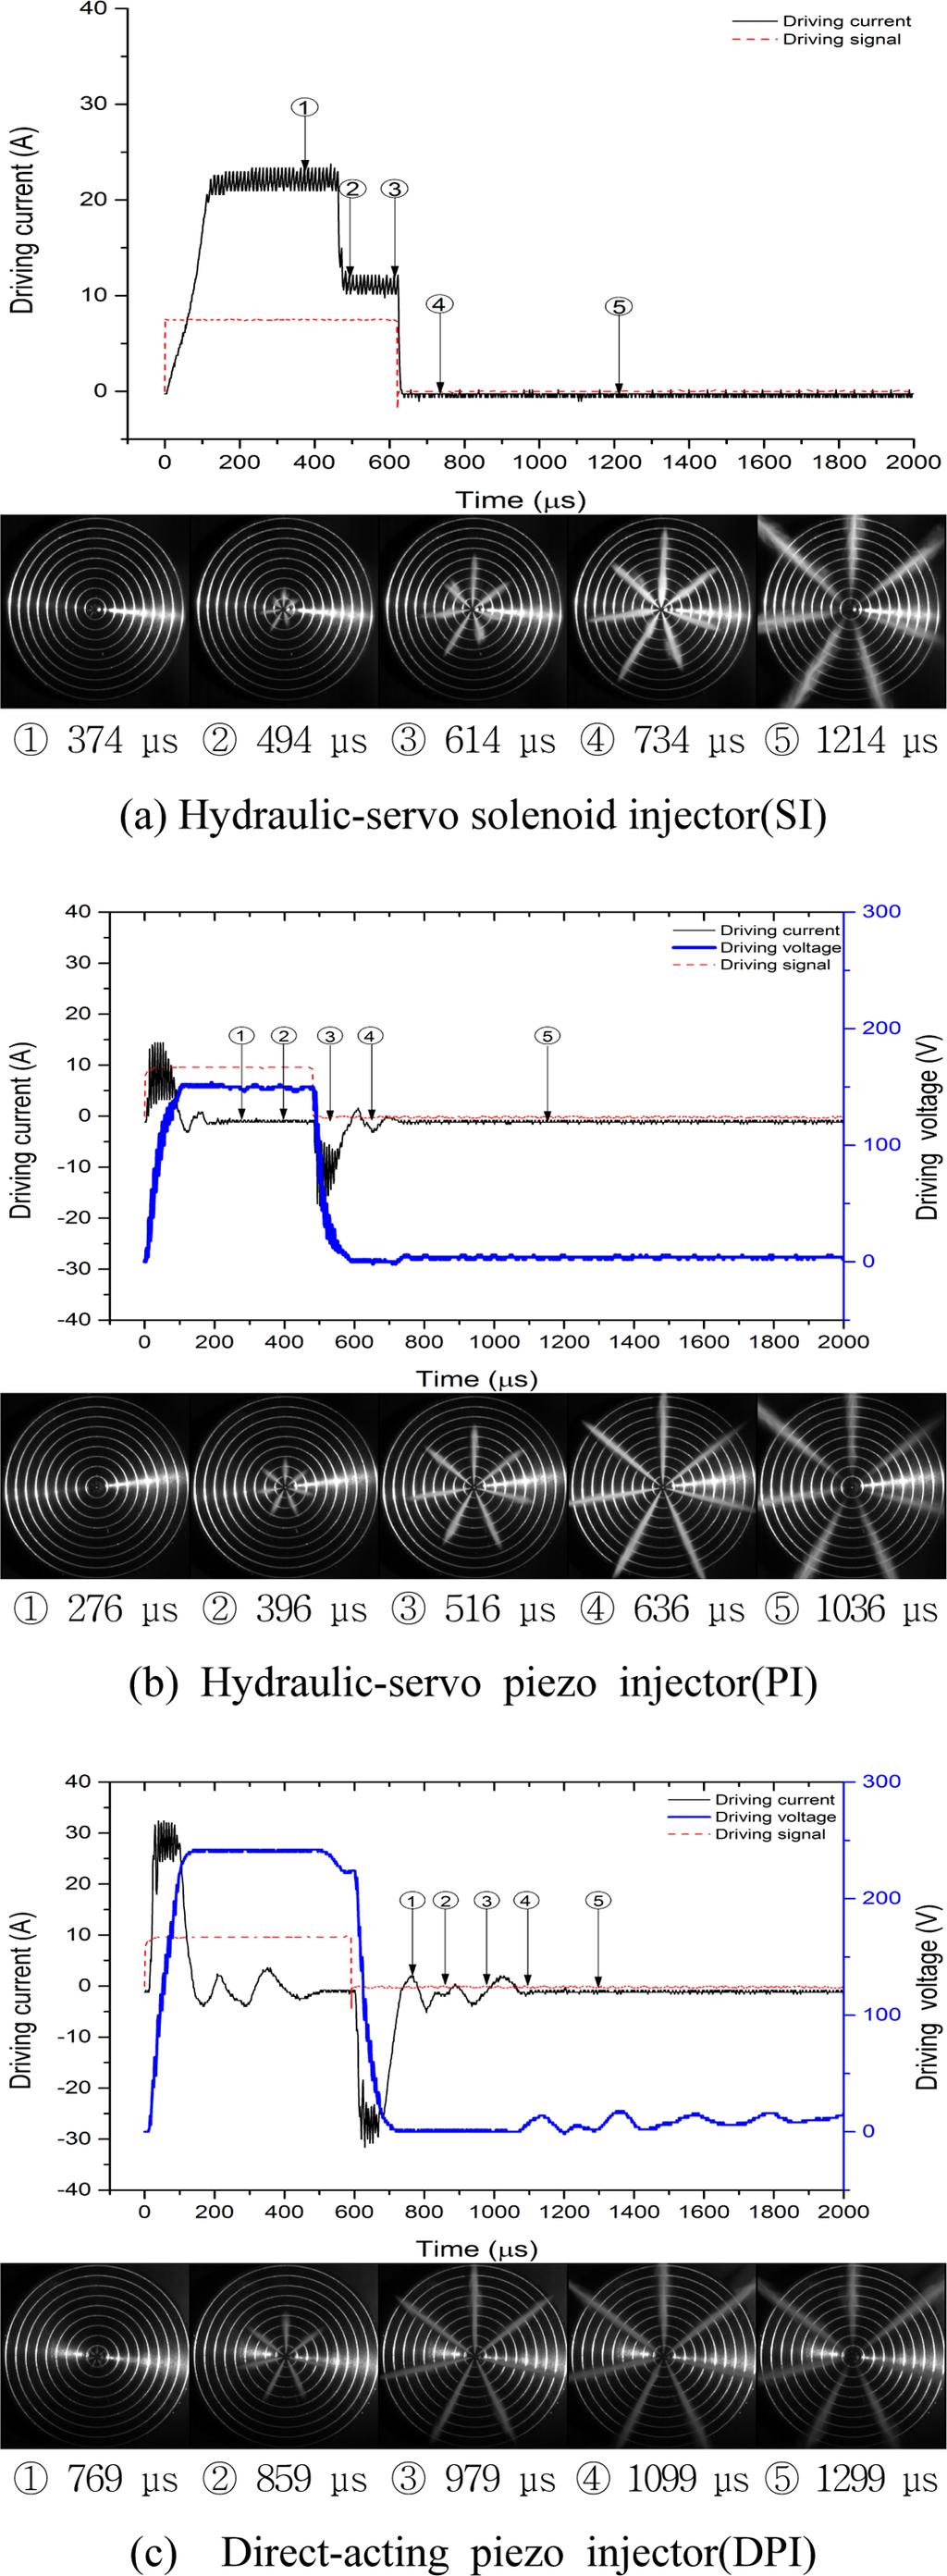 injectors at injection pressure of 30 MPa Fig.